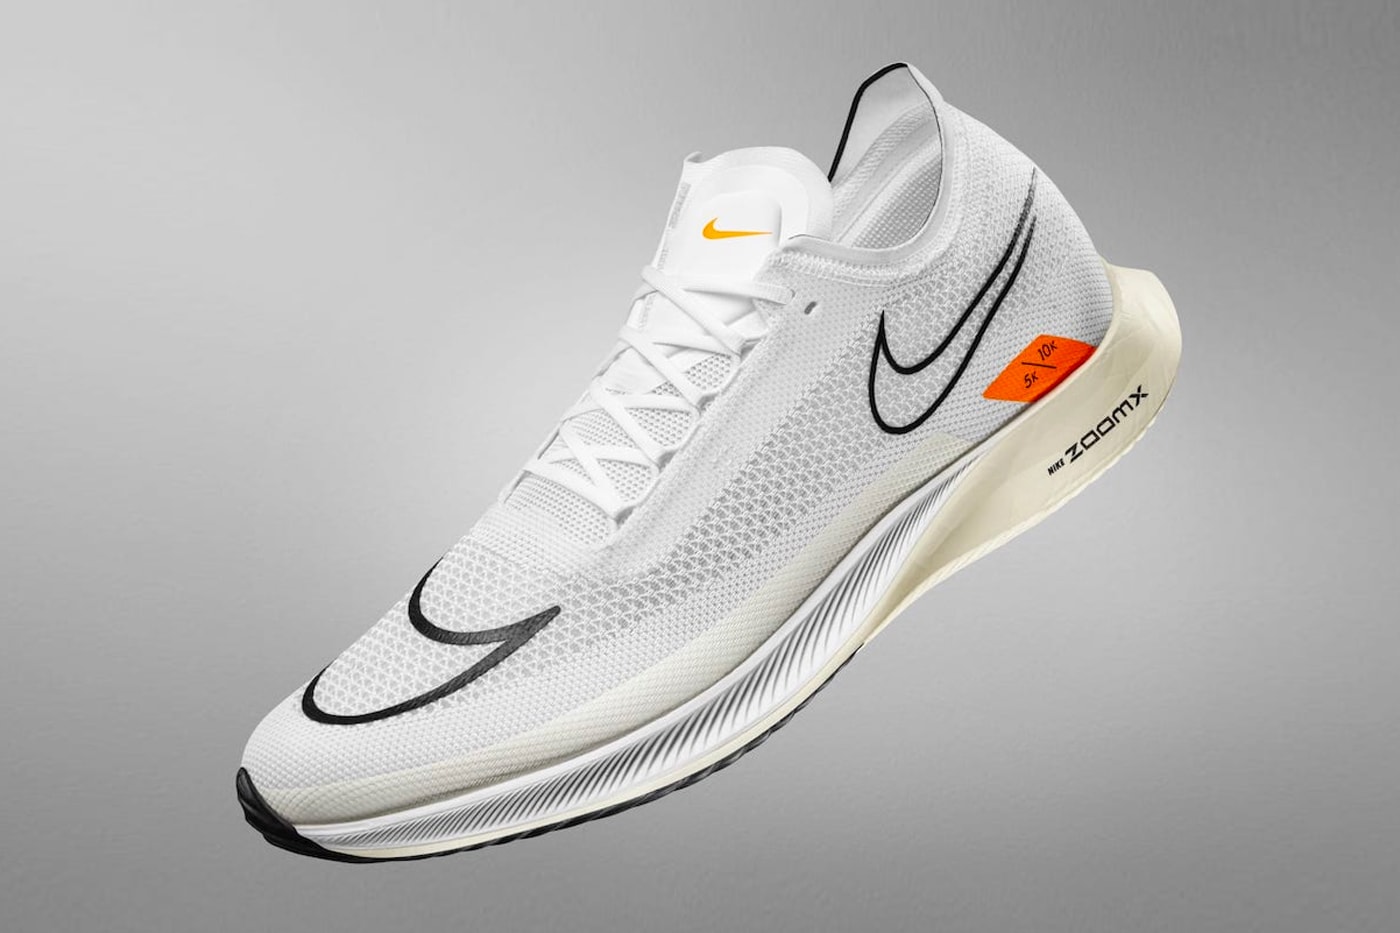 Nike ZoomX Streakfly: Fast, Furious, Futuristic Running Shoe